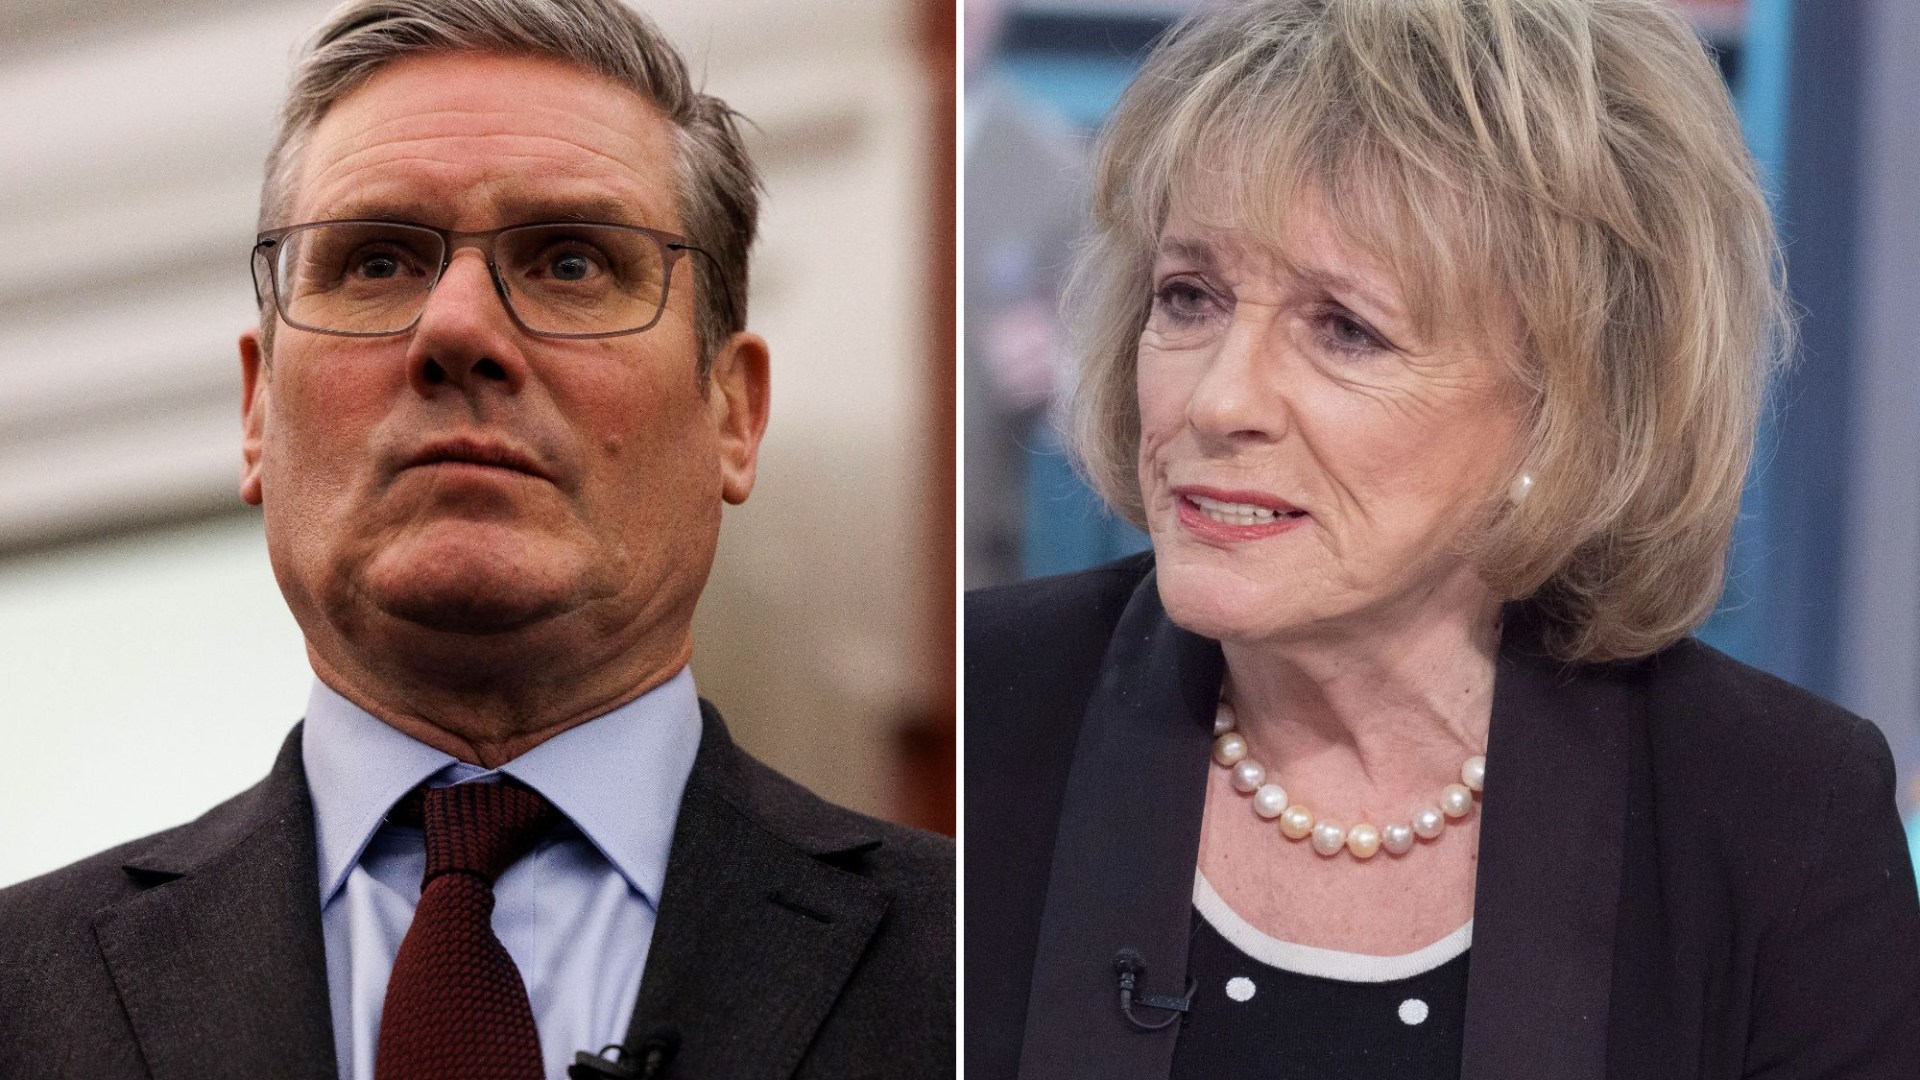 Labour’s Keir Starmer vows to support assisted dying vote for cancer-stricken Dame Esther Rantzen